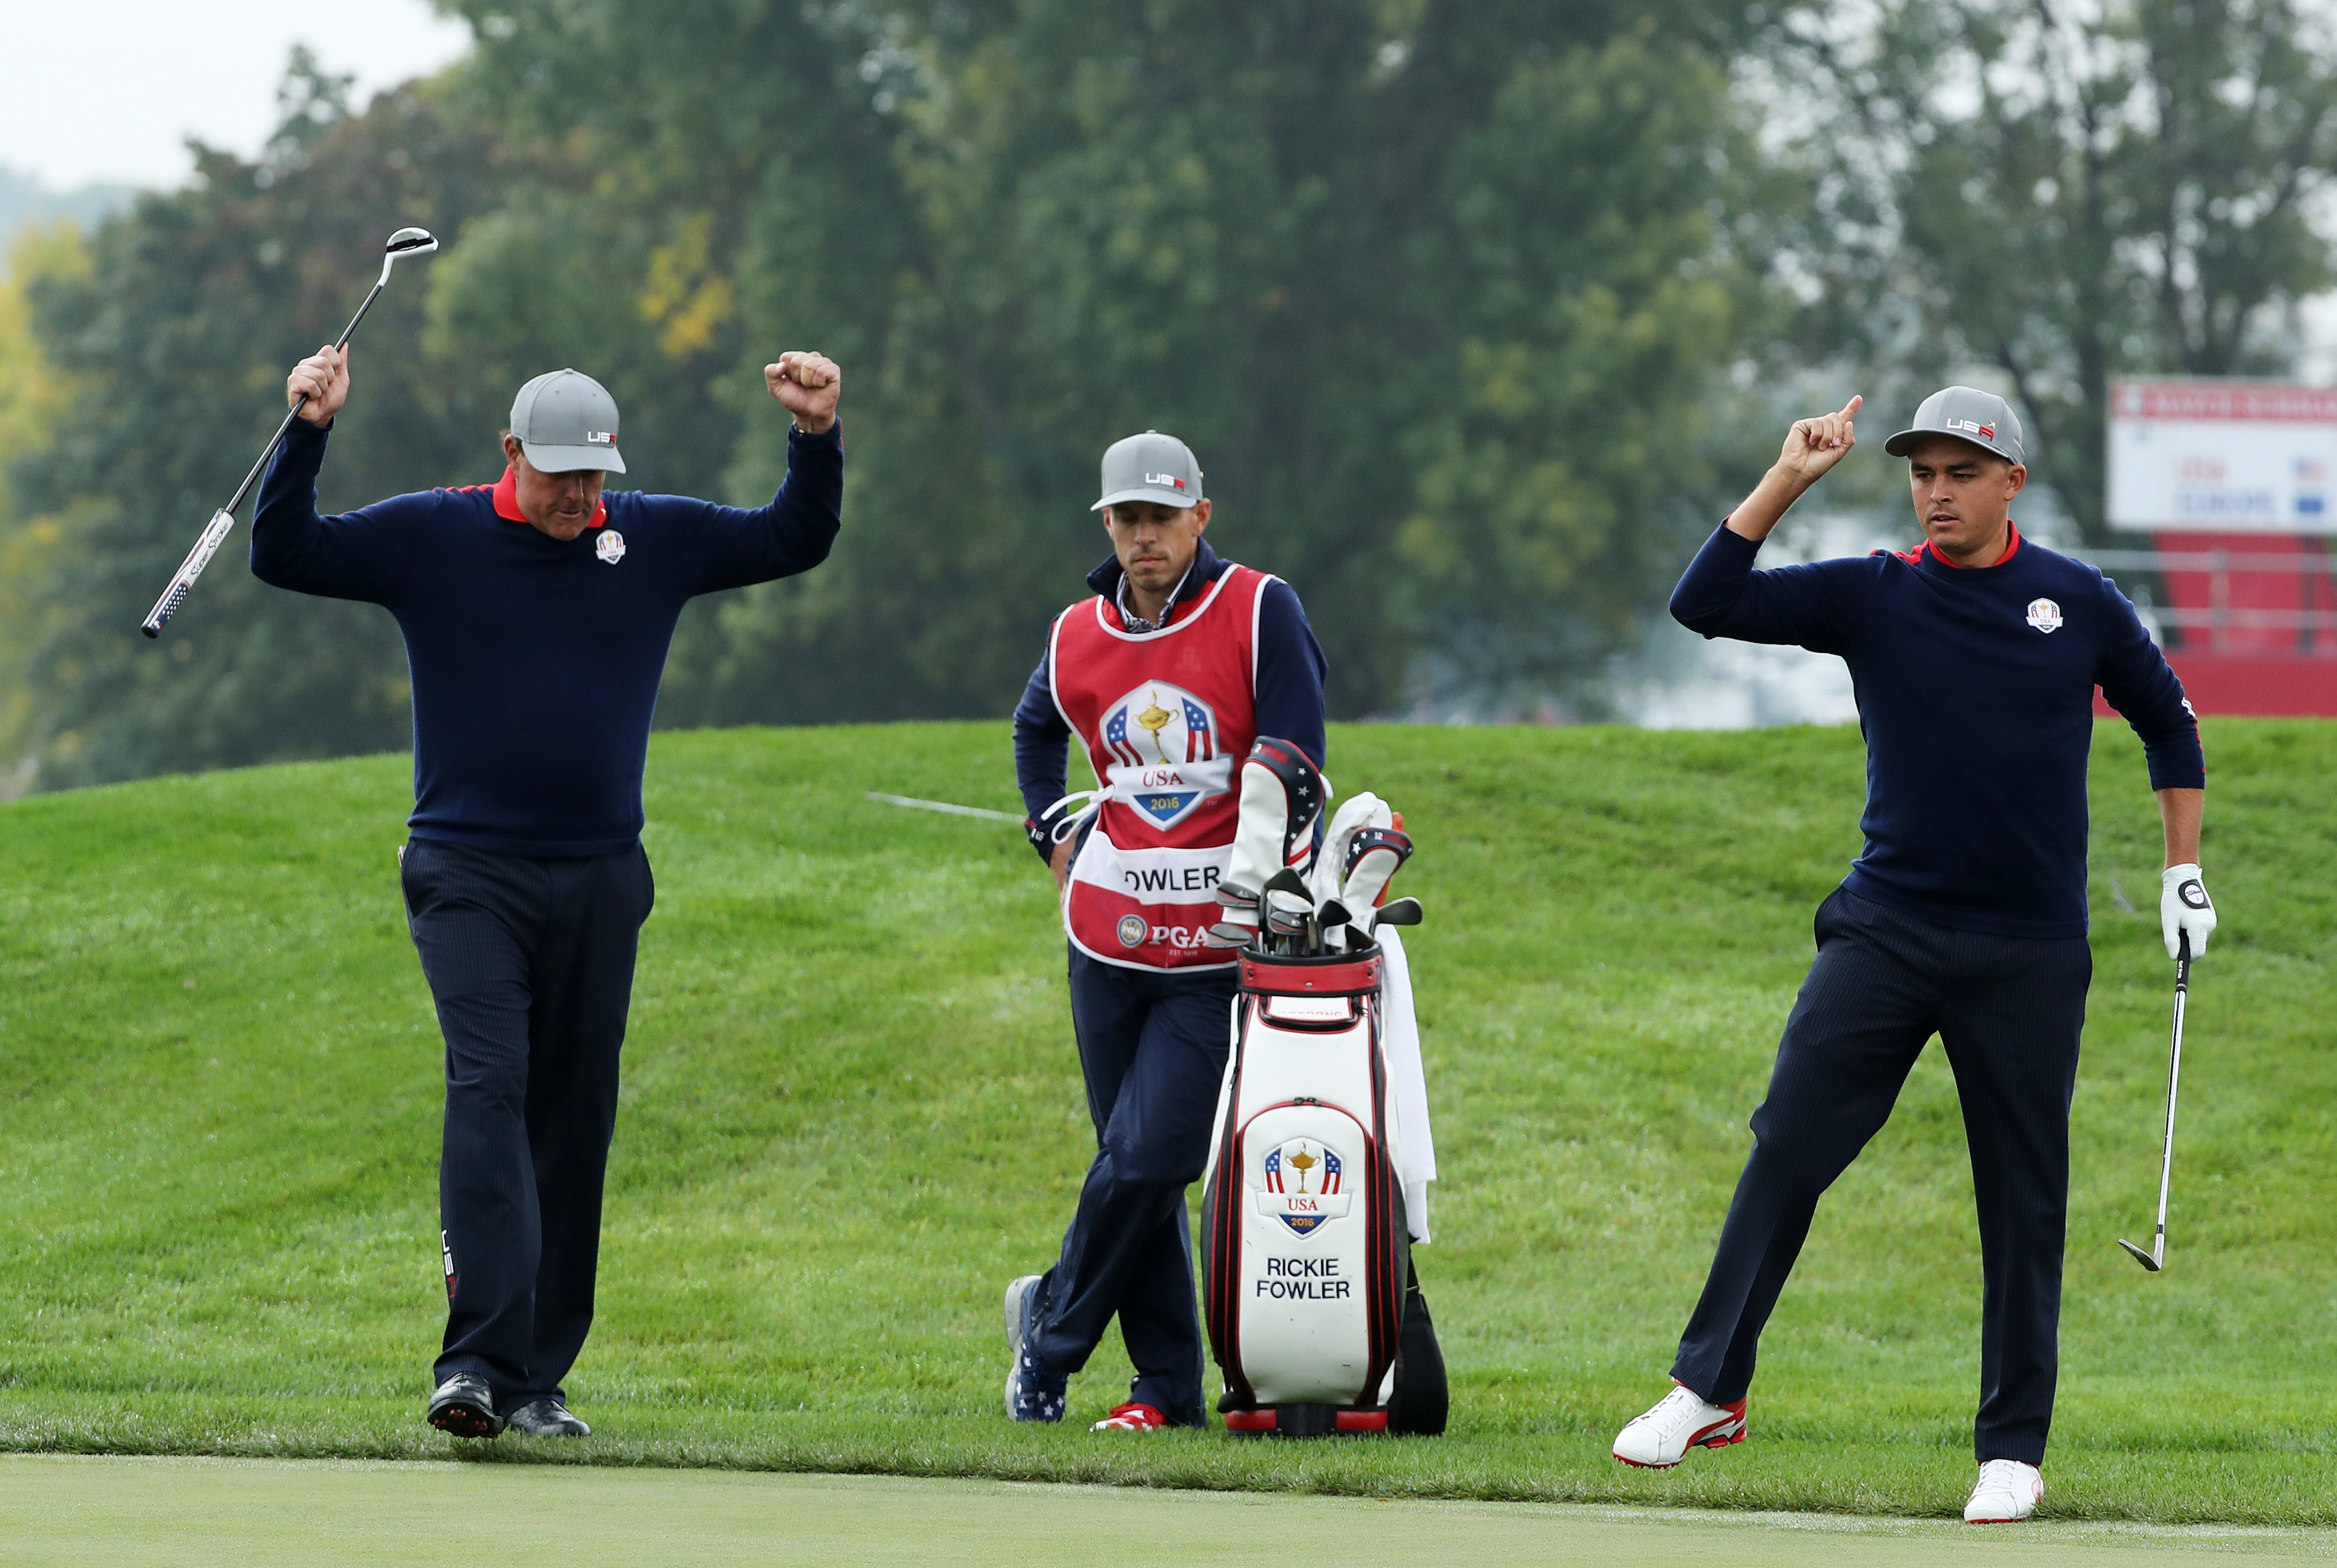 Ryder Cup: USA cruise to 4-0 lead after morning foursomes